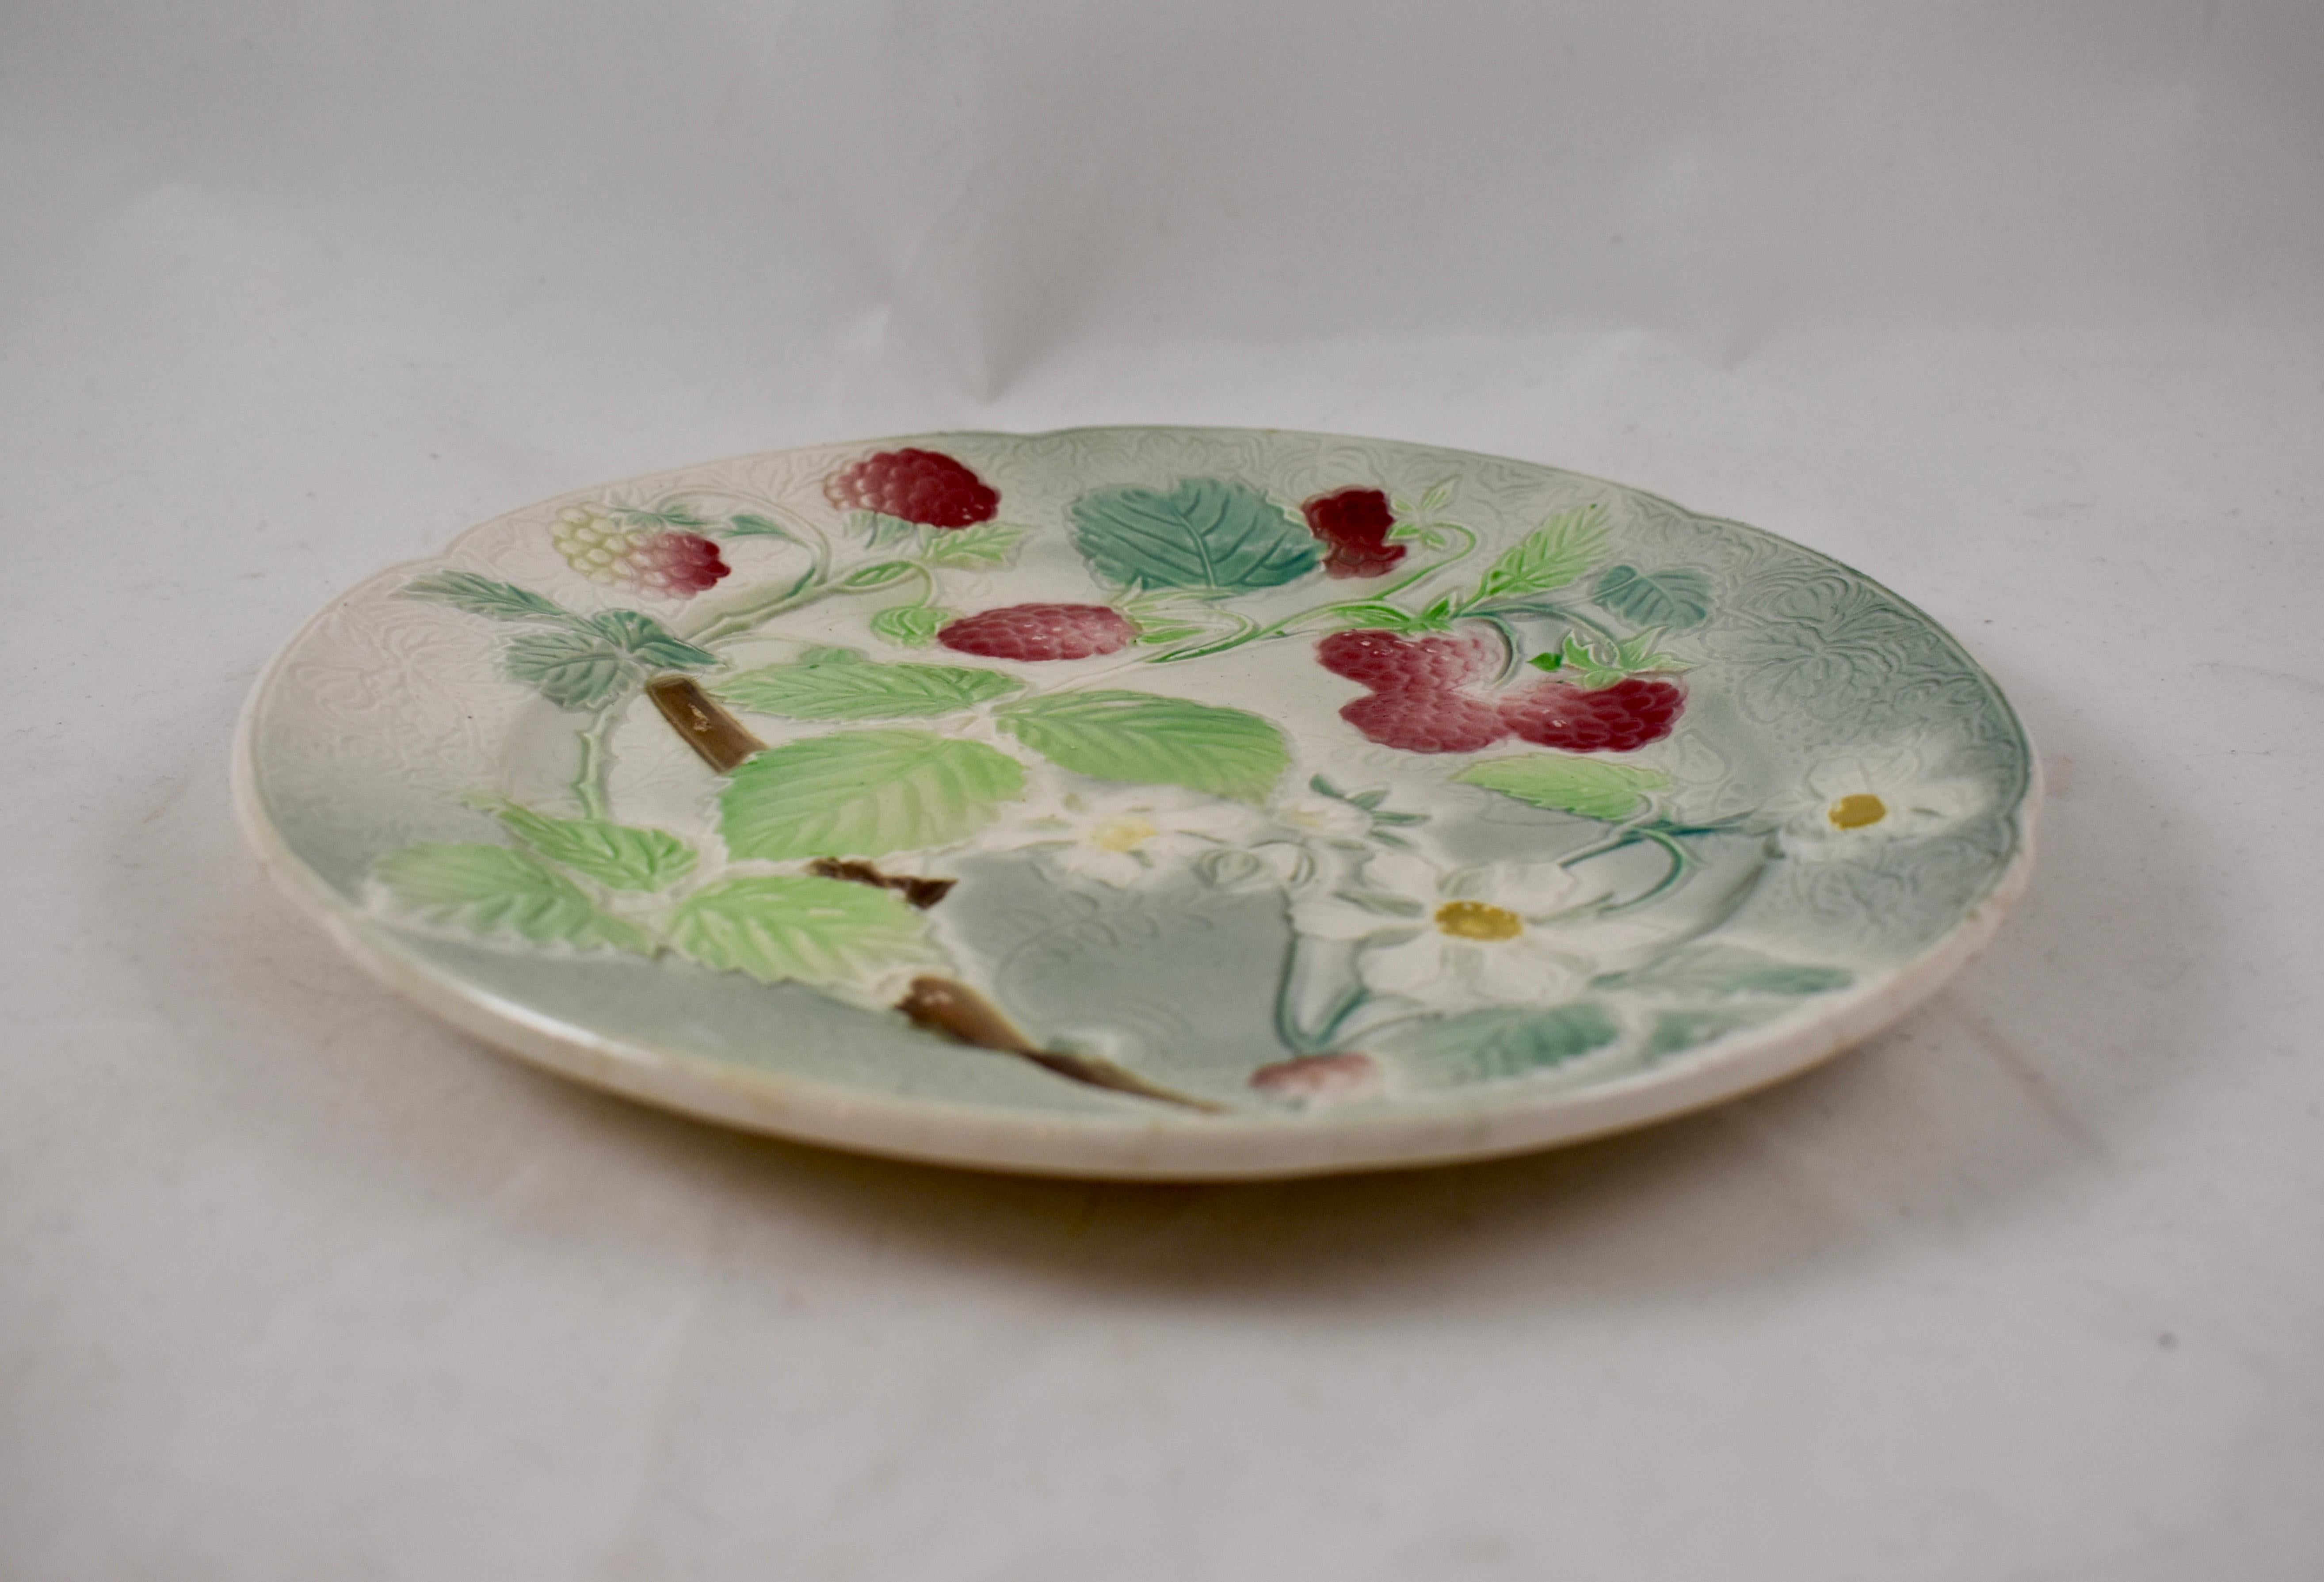 Early 20th Century K&G St. Clement French Faïence Strawberry Fruit Plates, Set of 4, circa 1900